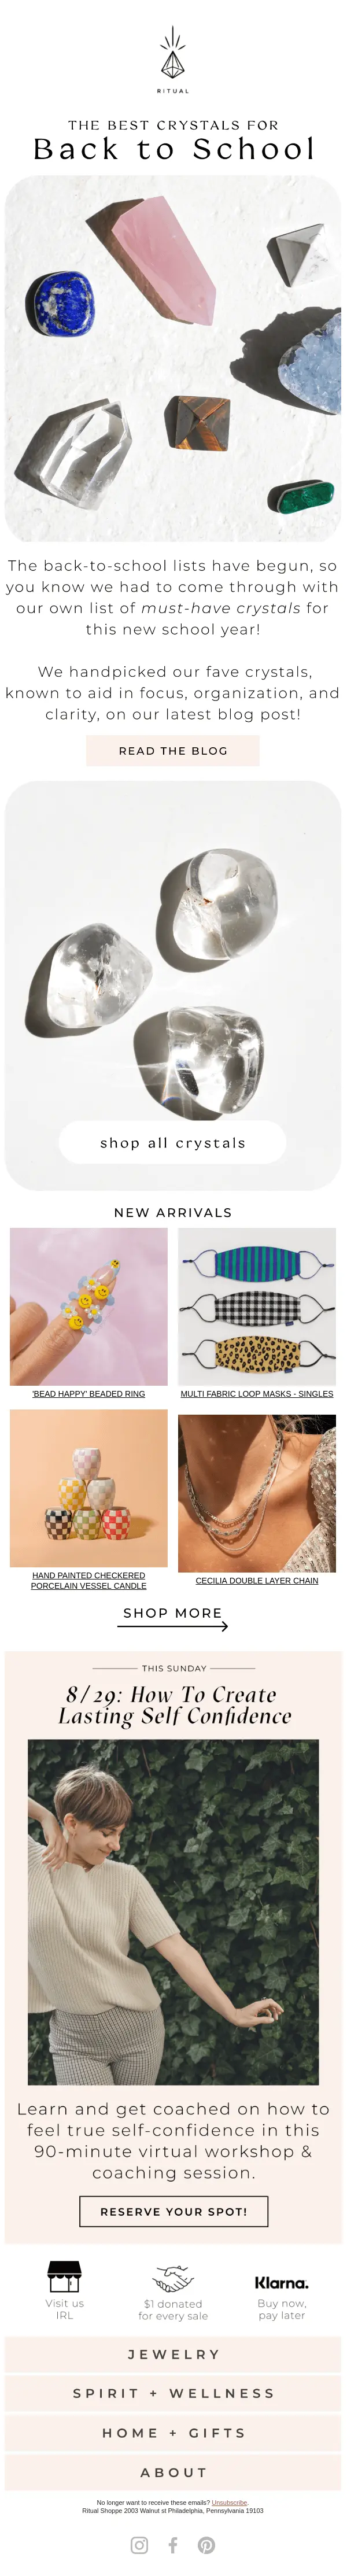 Image shows a back-to-school email from Ritual Shoppe